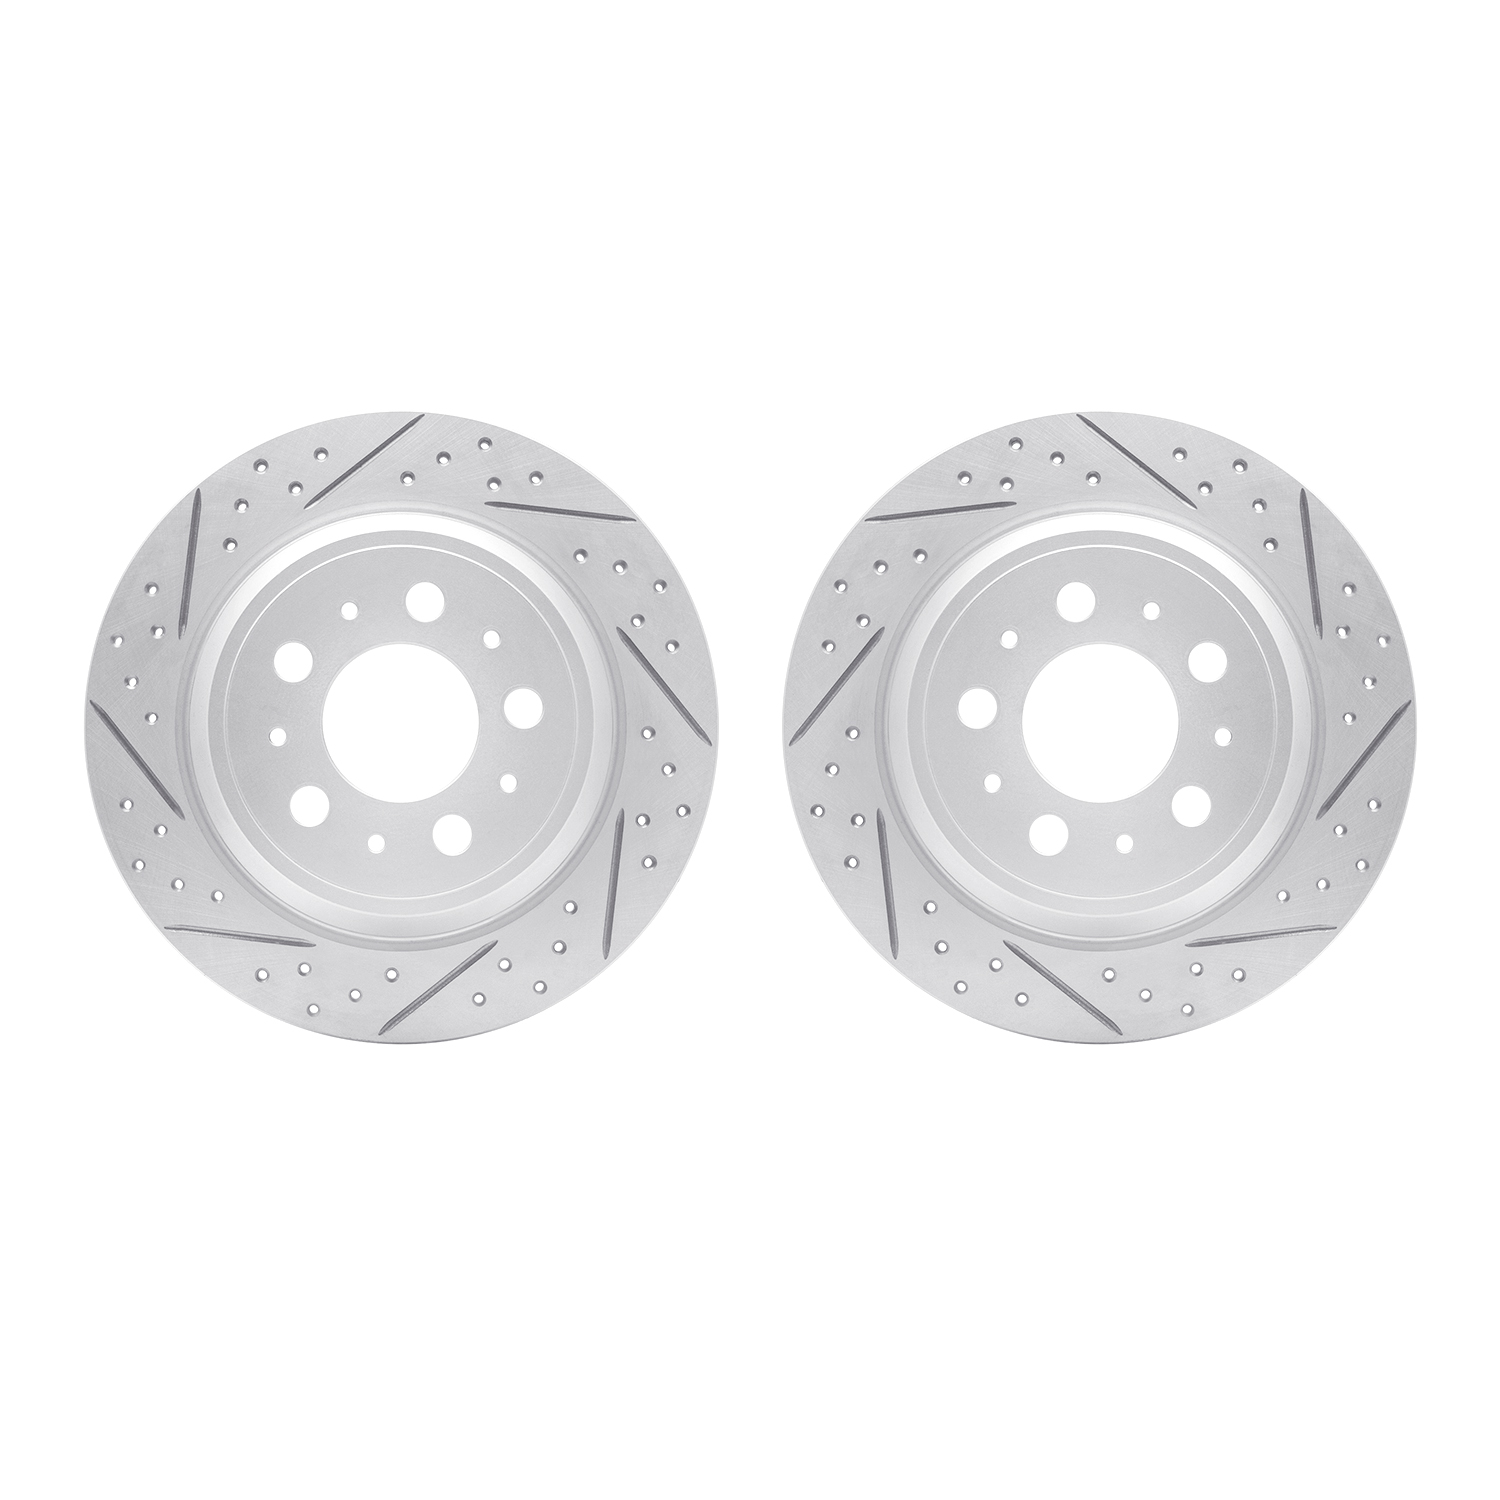 2002-27025 Geoperformance Drilled/Slotted Brake Rotors, 1999-2009 Volvo, Position: Rear